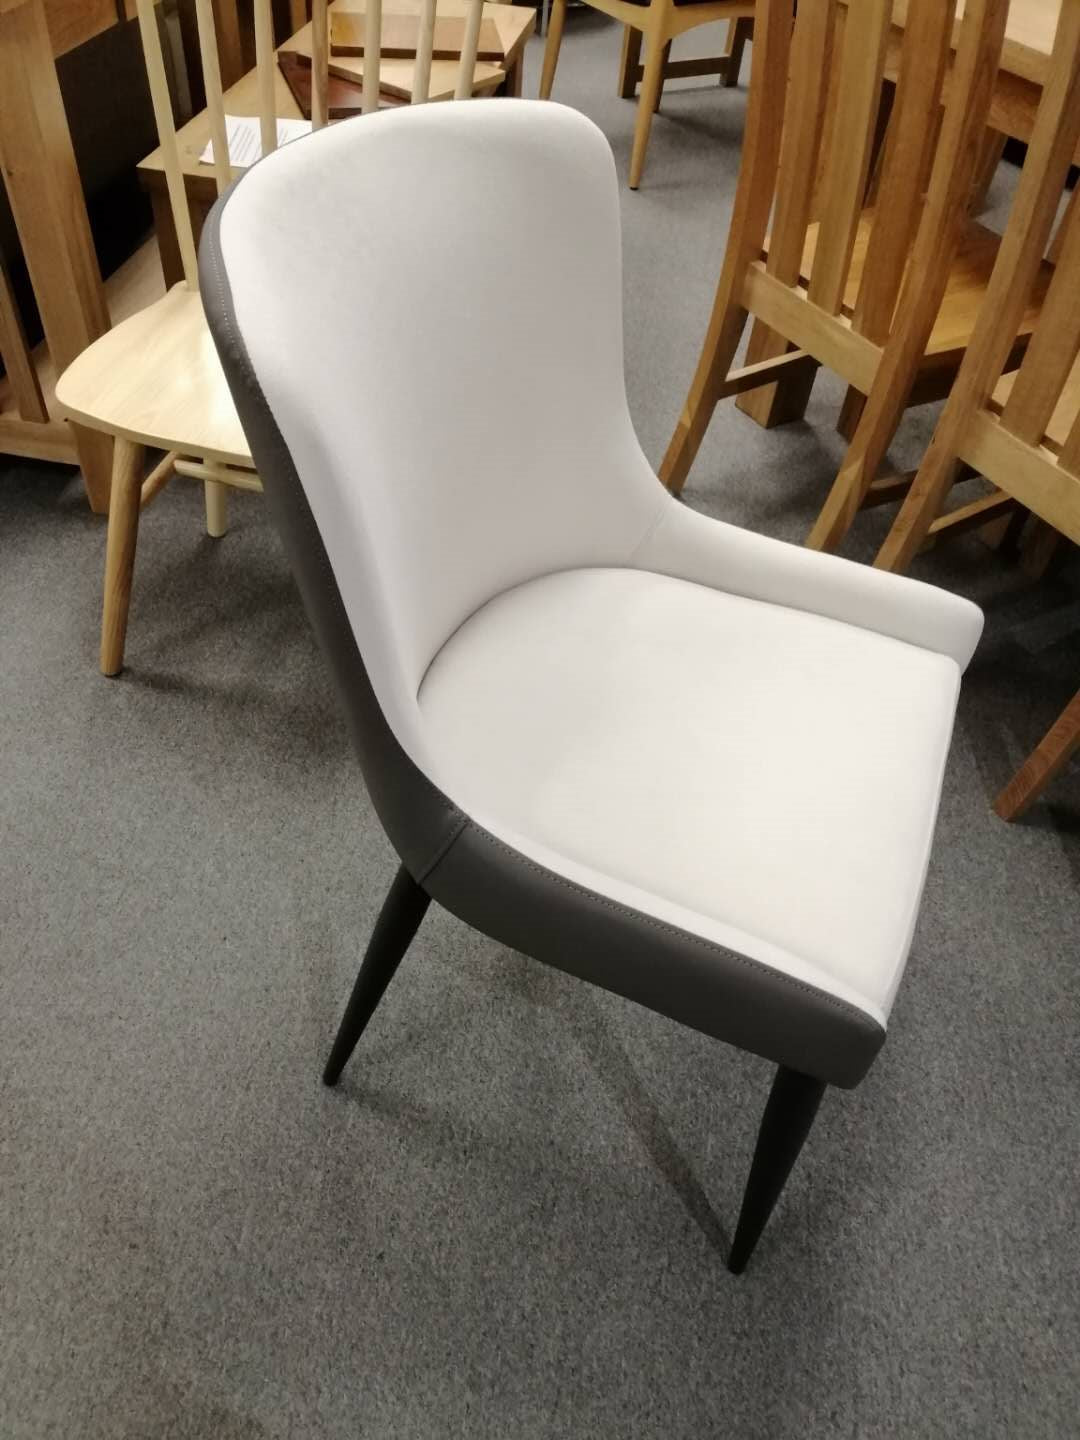 Elegant Italian Design Microfiber leather Dining Chair #1829, 2 color in stock now